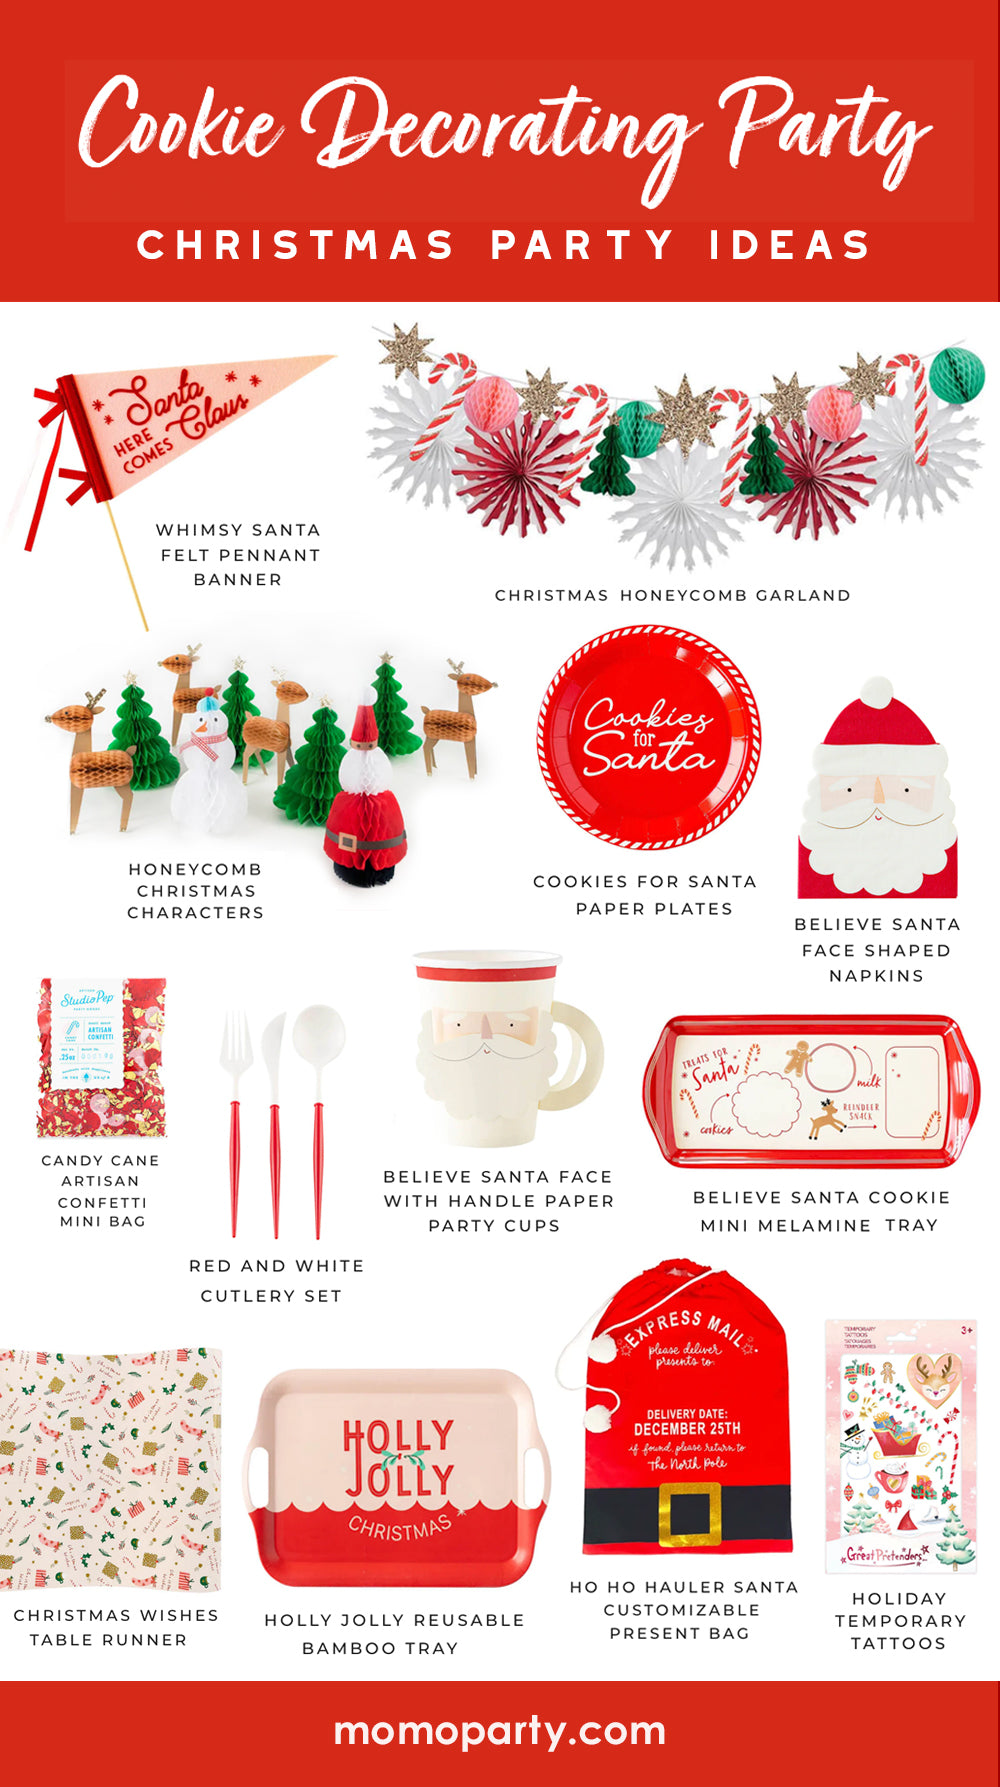 A guide featuring Momo Party's Holiday party supplies and decorations for a kid's Christmas cookie decorating party. Inspired by Santa and everything festive, these modern party supplies including plates, party cups, serving trays, napkins and garlands will be perfect for your holiday gathering this season.